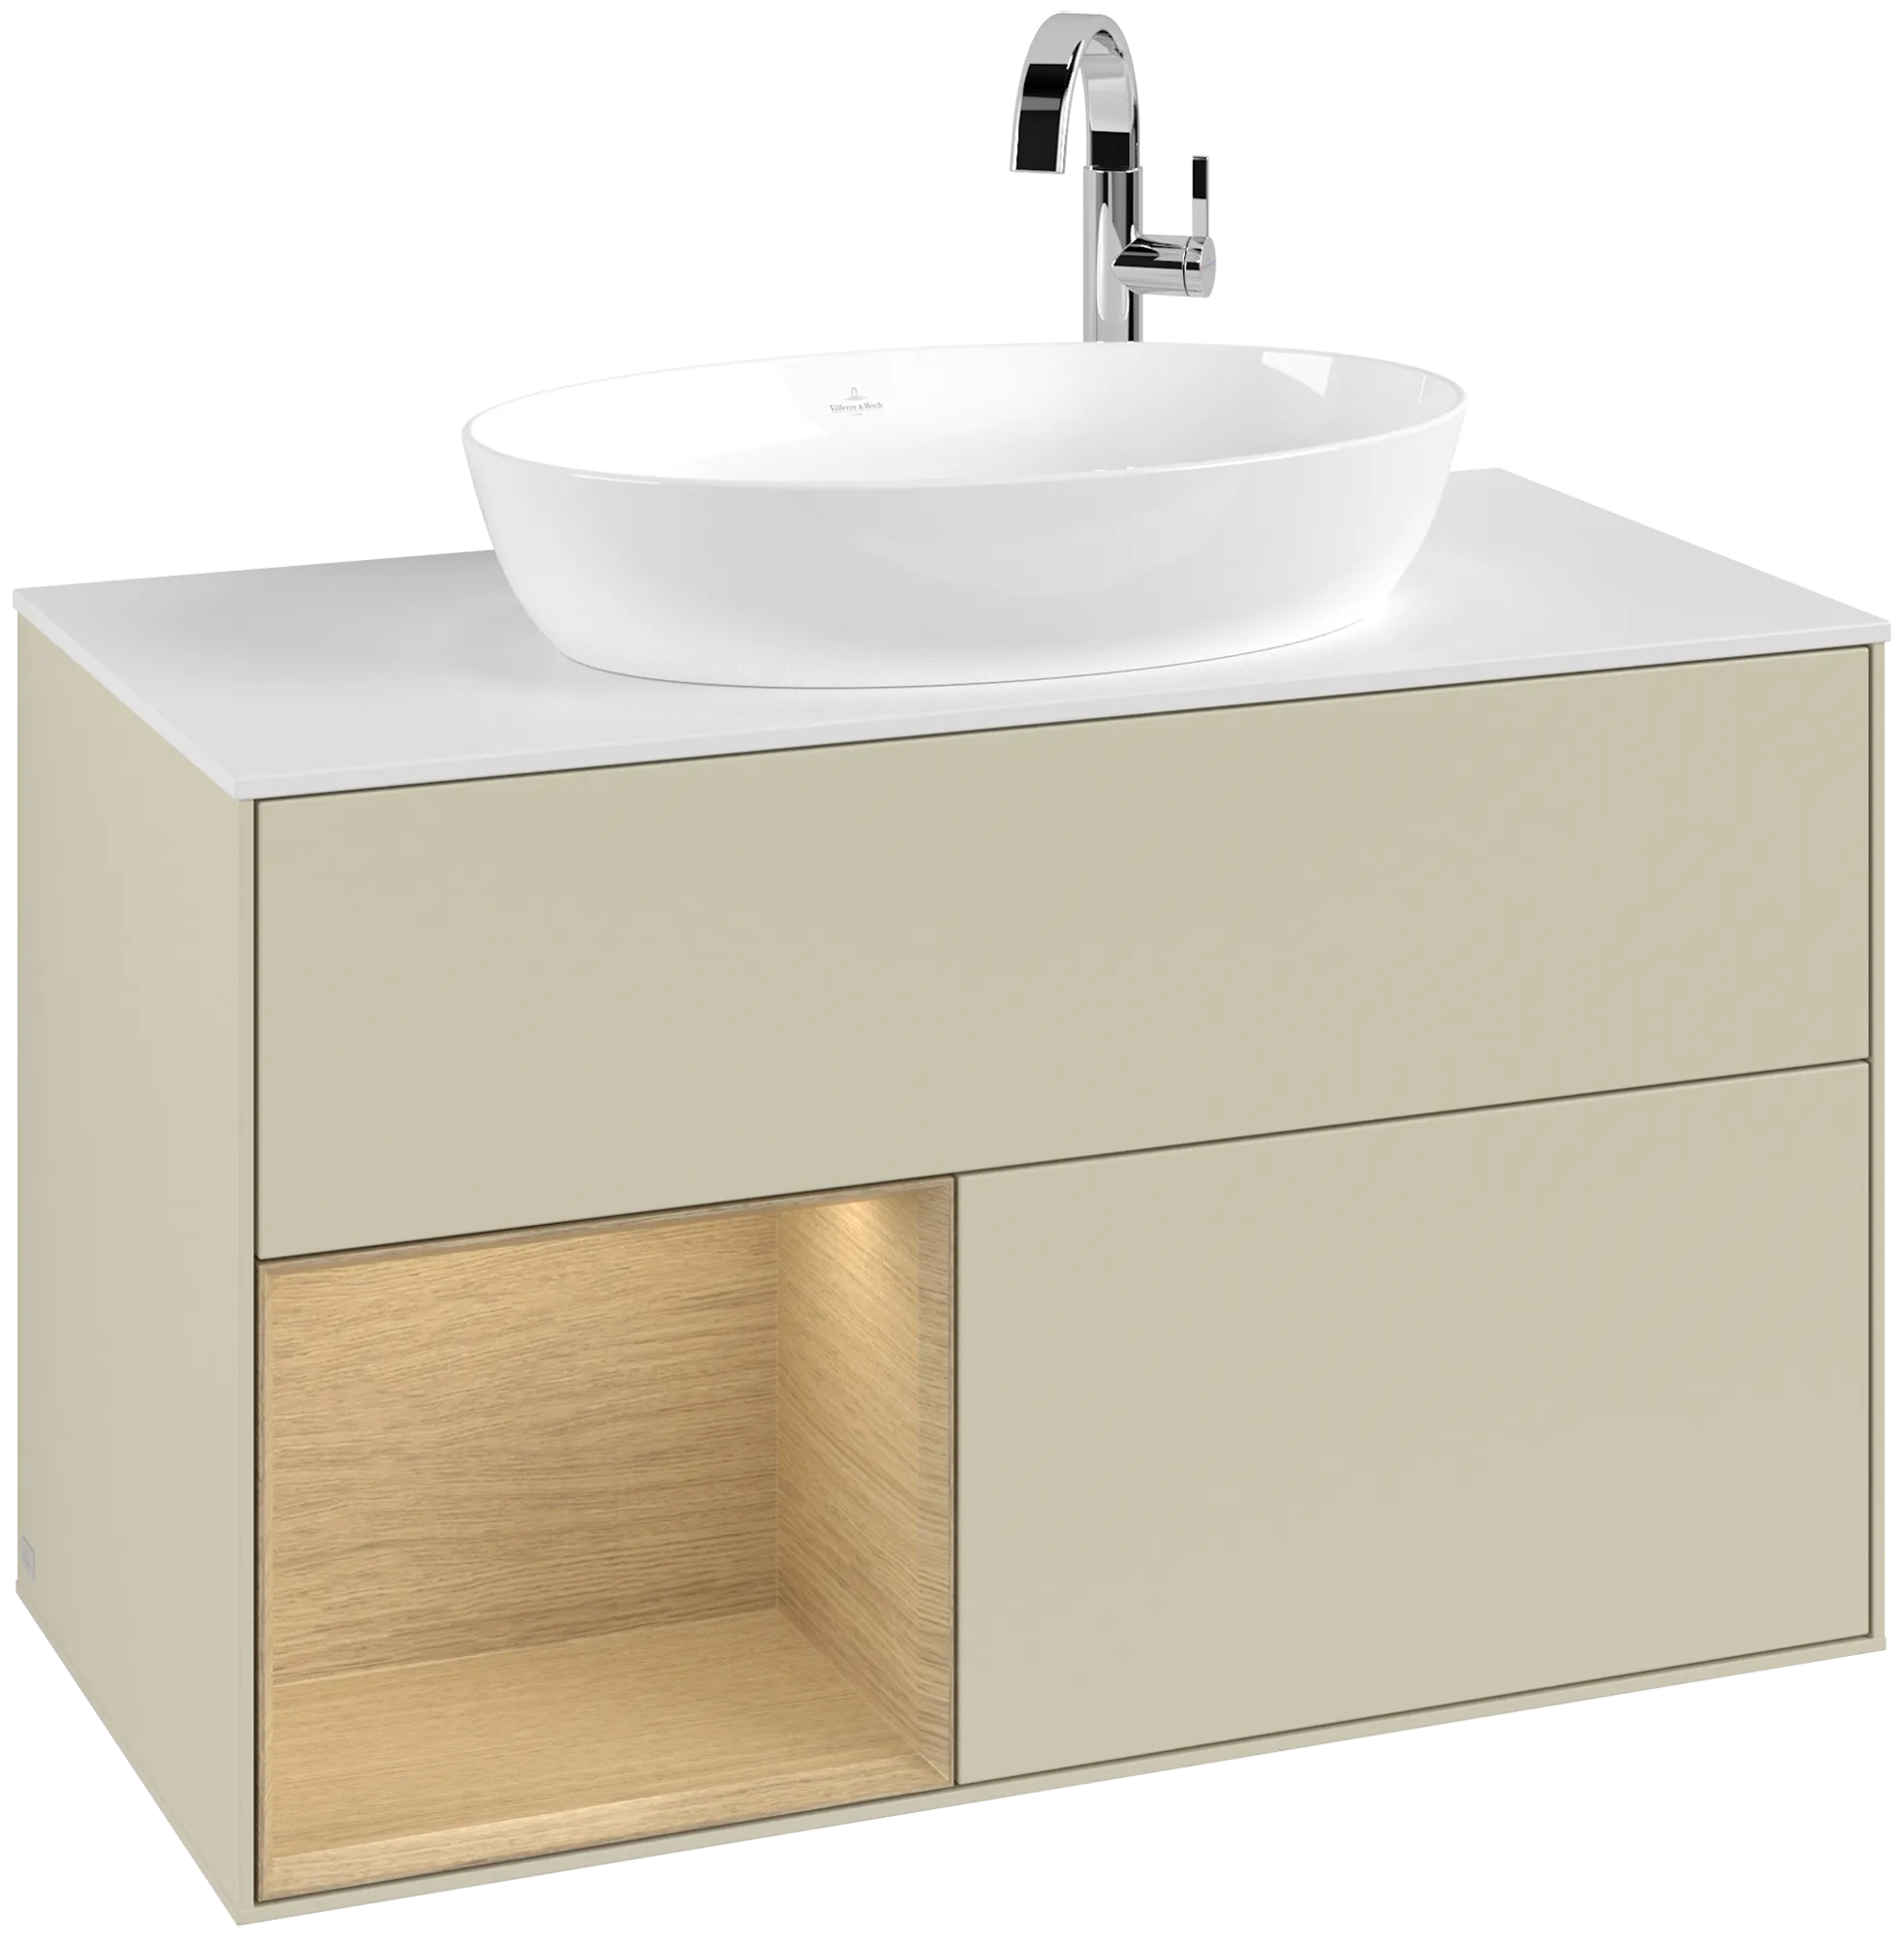 Picture of VILLEROY BOCH Finion Vanity unit, with lighting, 2 pull-out compartments, 1000 x 603 x 501 mm, Silk Grey Matt Lacquer / Oak Veneer / Glass White Matt #G891PCHJ